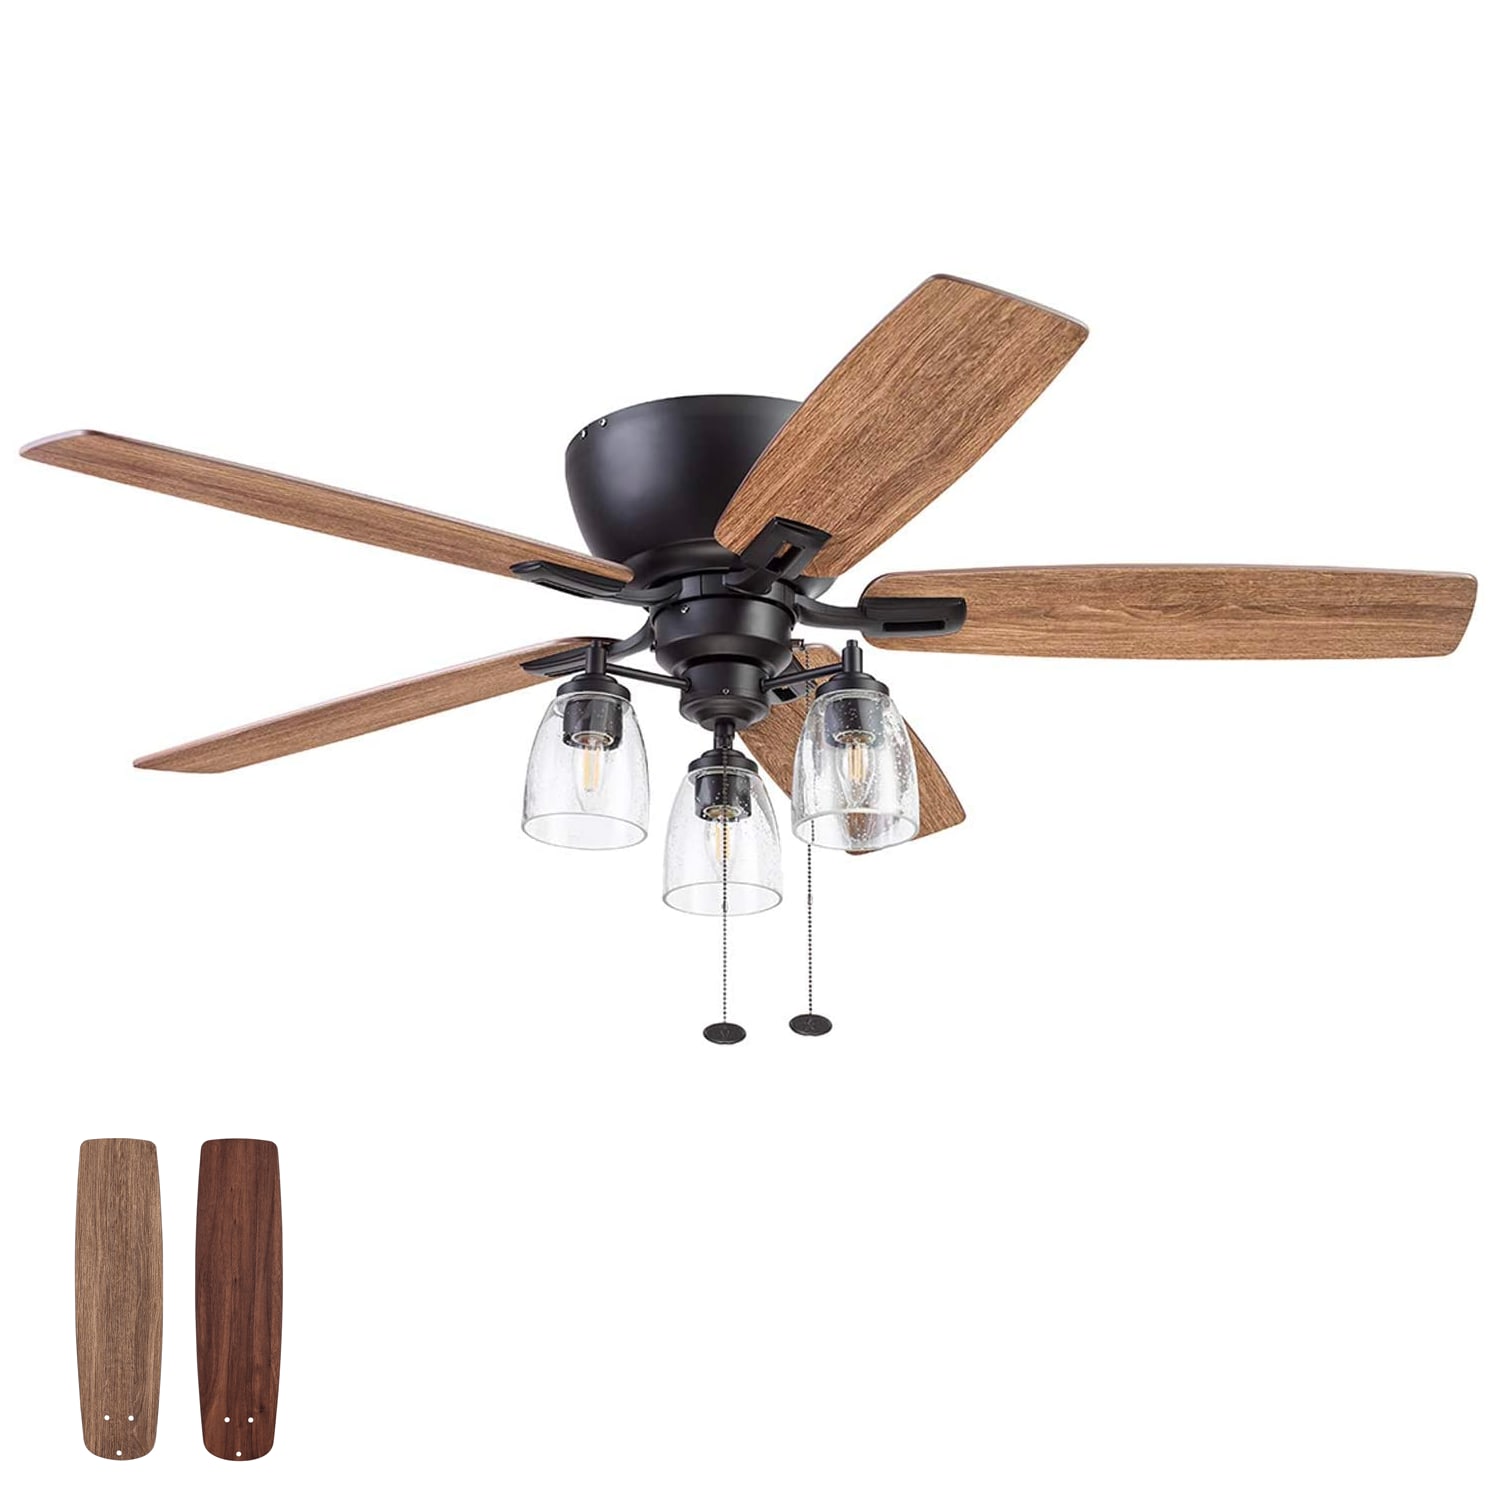 Details about   Prominence Home Roadside Trail Farmhouse 52  Brushed Nickel LED Ceiling Fan, 